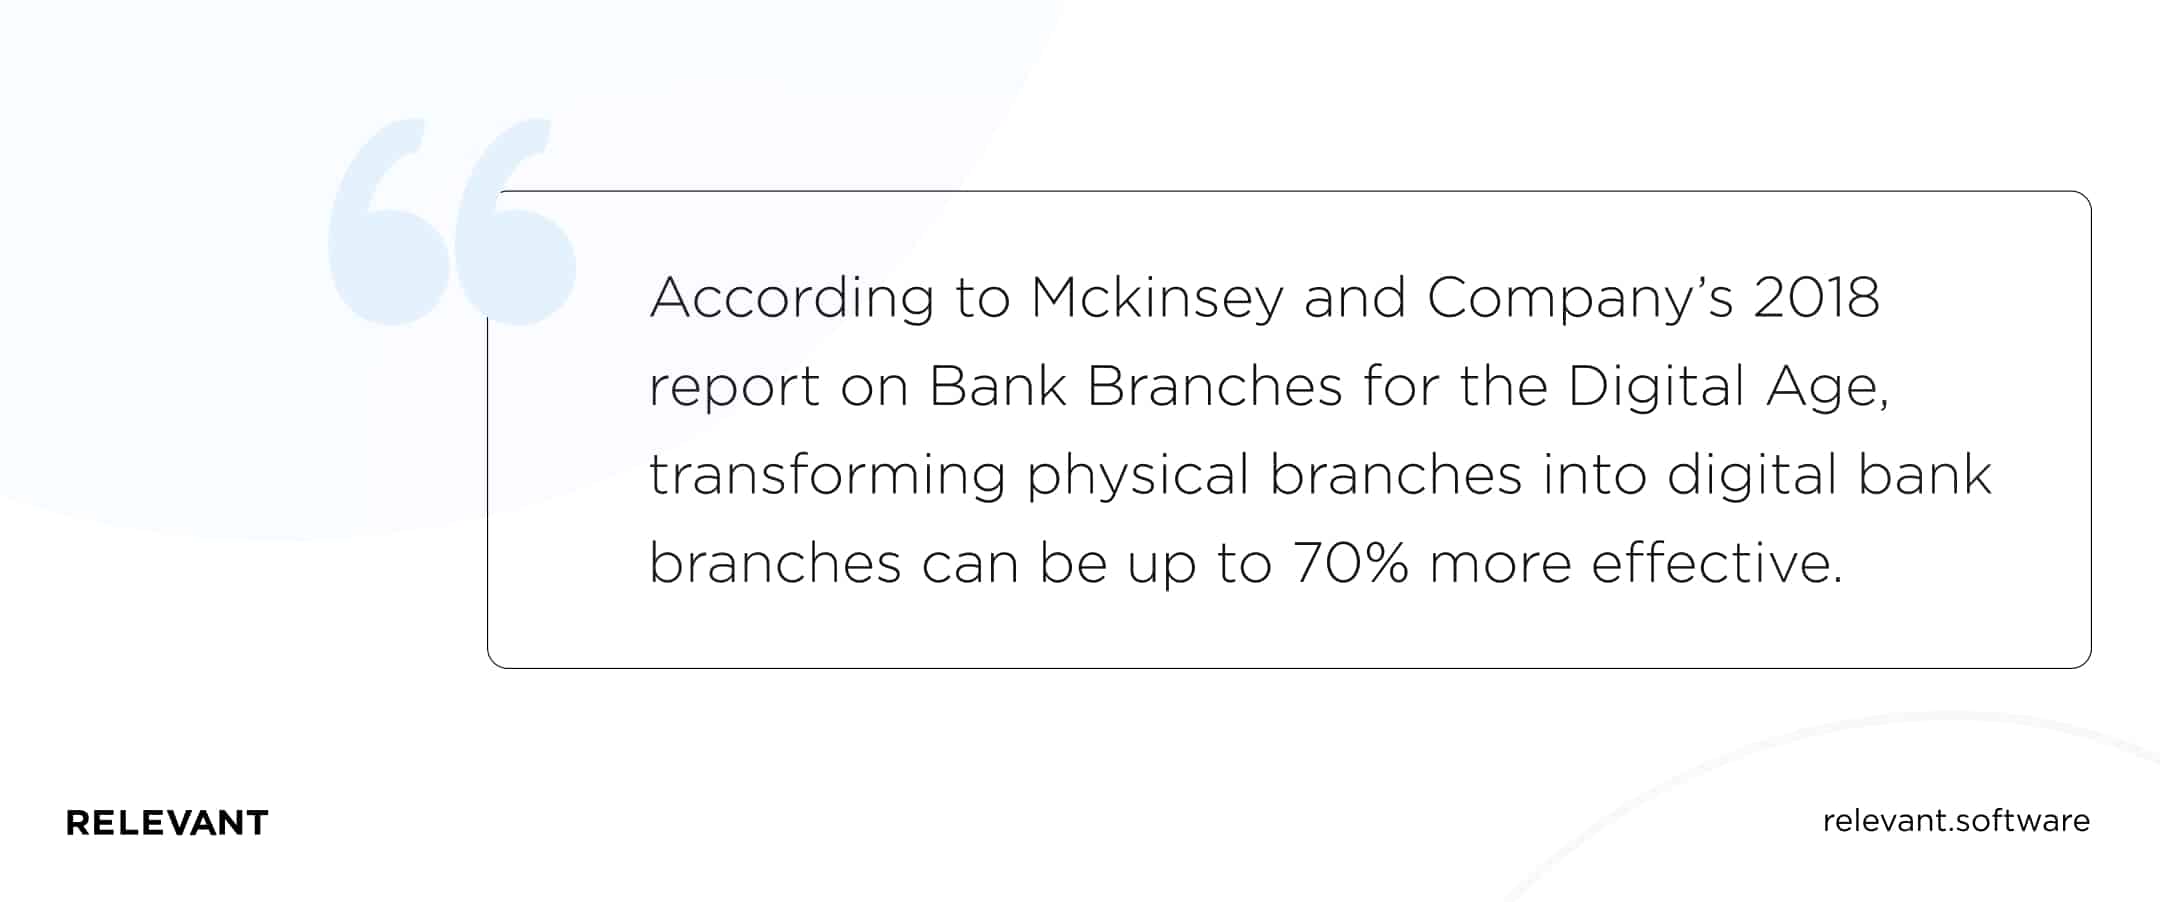 According to Mckinsey and Company’s 2018 report on Bank Branches for the Digital Age, transforming physical branches into digital bank branches can be up to 70% more effective.